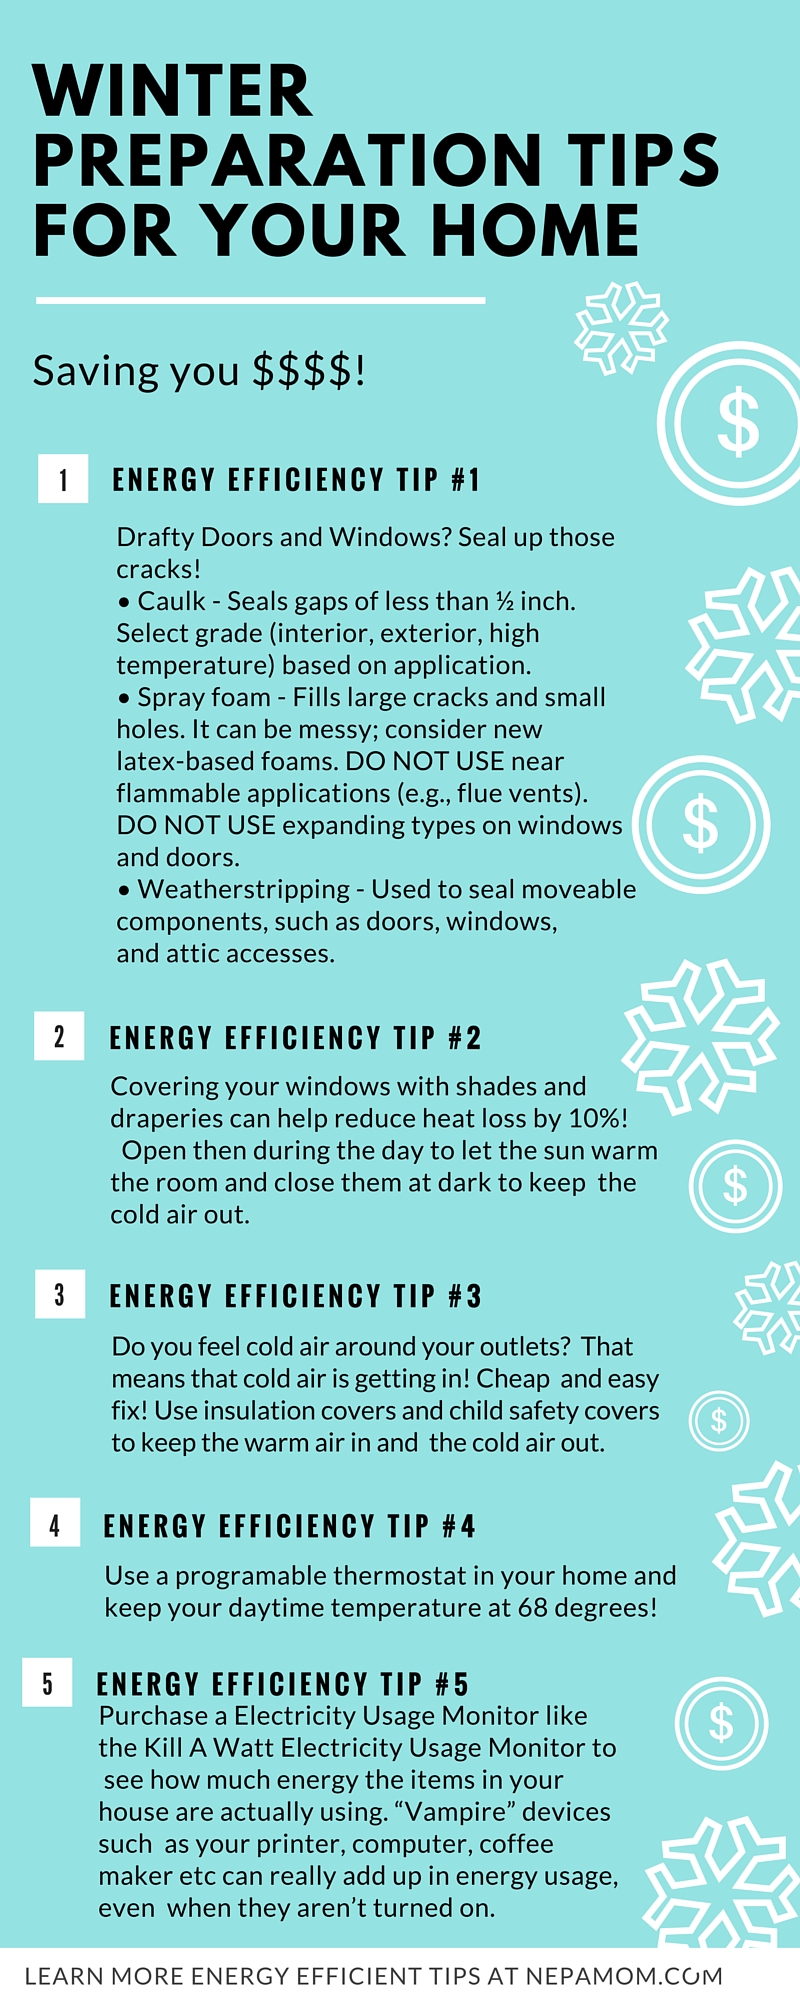 Winter Preparation Tips for your Home (1)